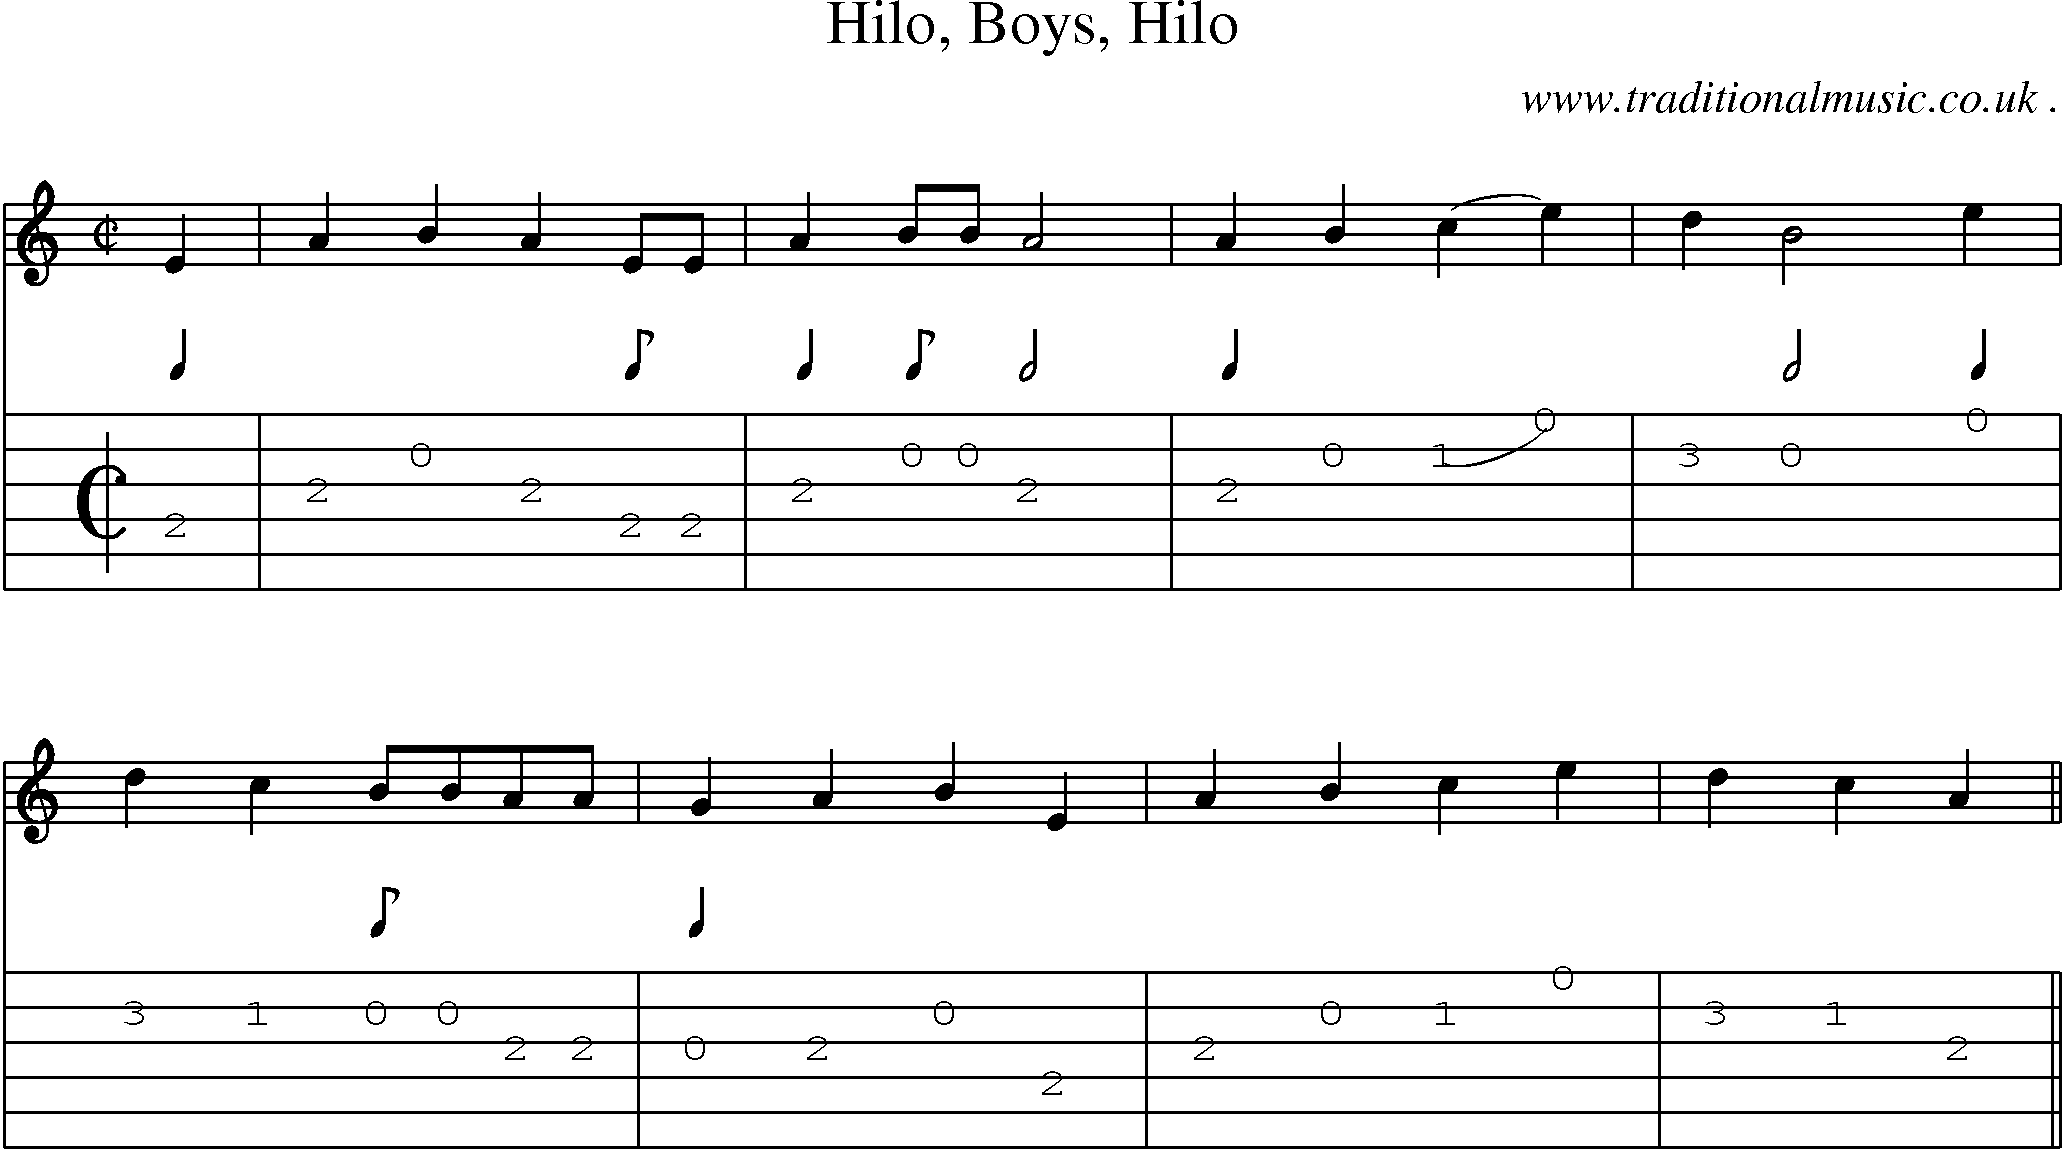 Sheet-Music and Guitar Tabs for Hilo Boys Hilo